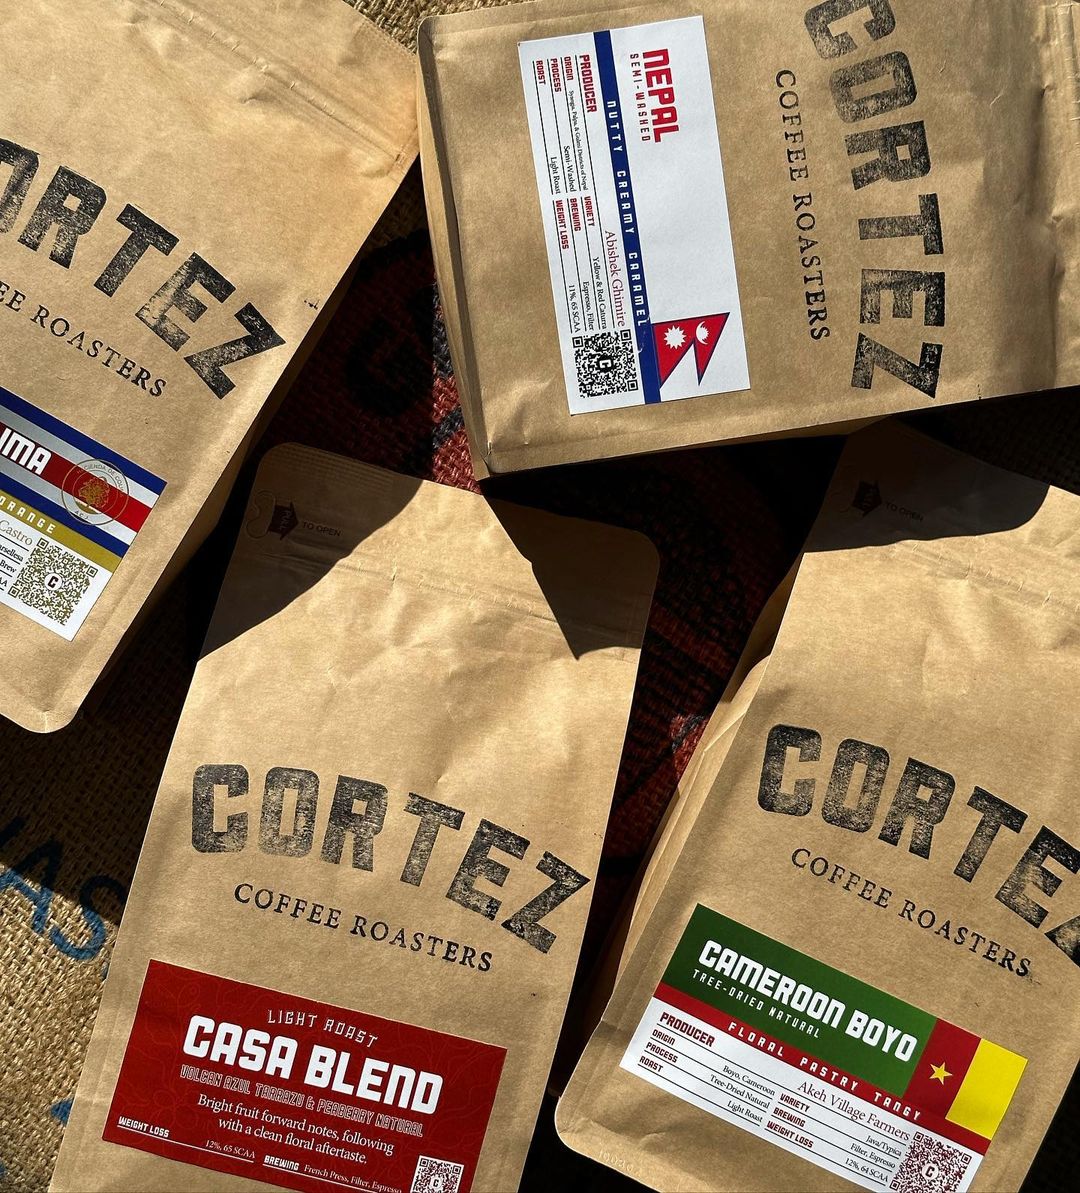 Cortez branded coffee bags.